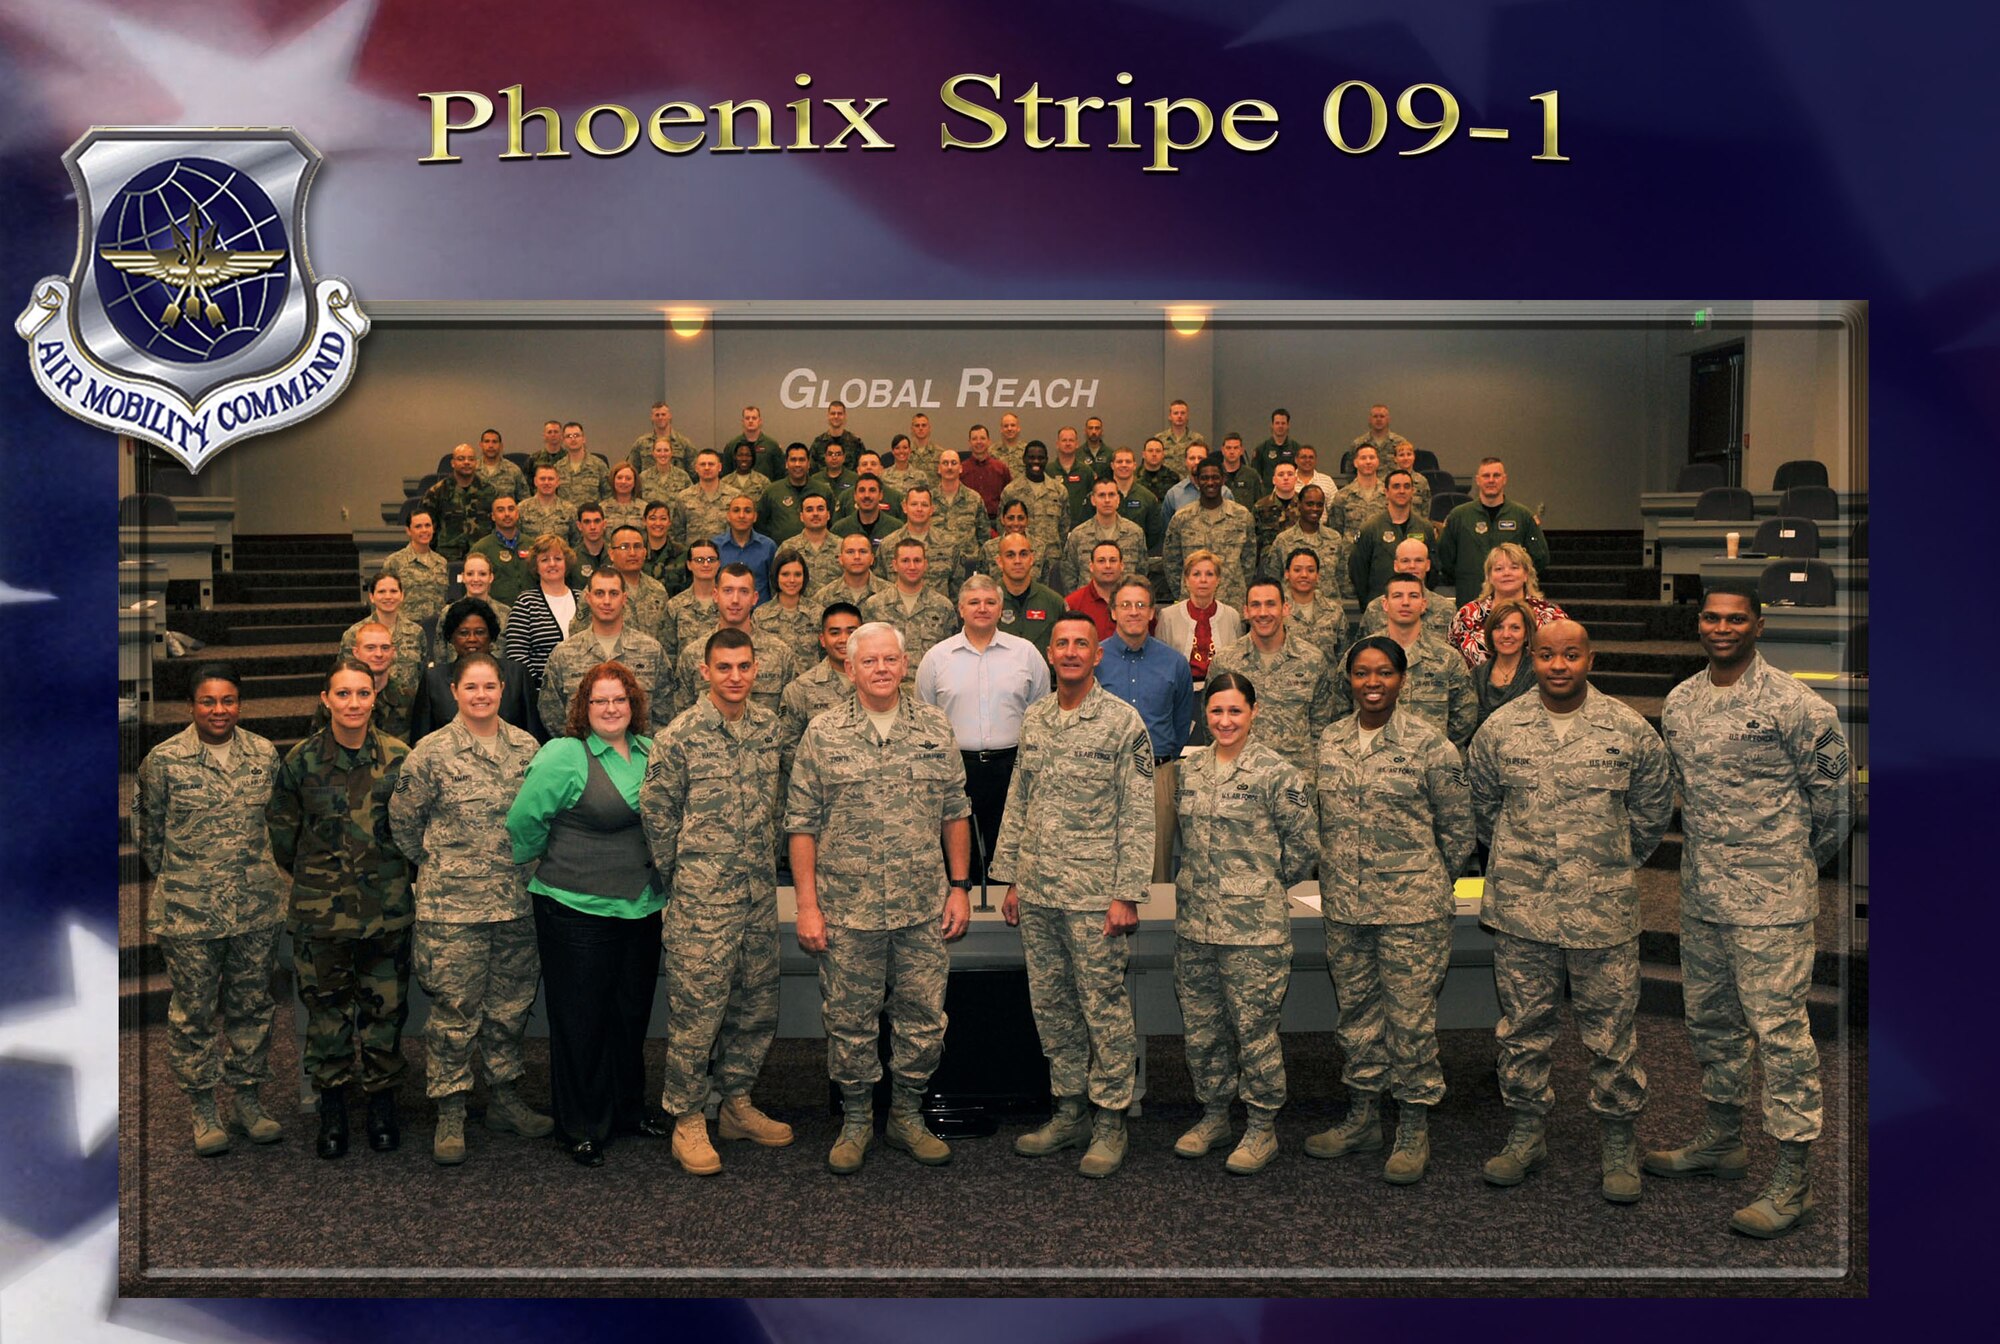 Air Mobility Command Phoenix Stripe 09-1 Attendees (Courtesy photo).